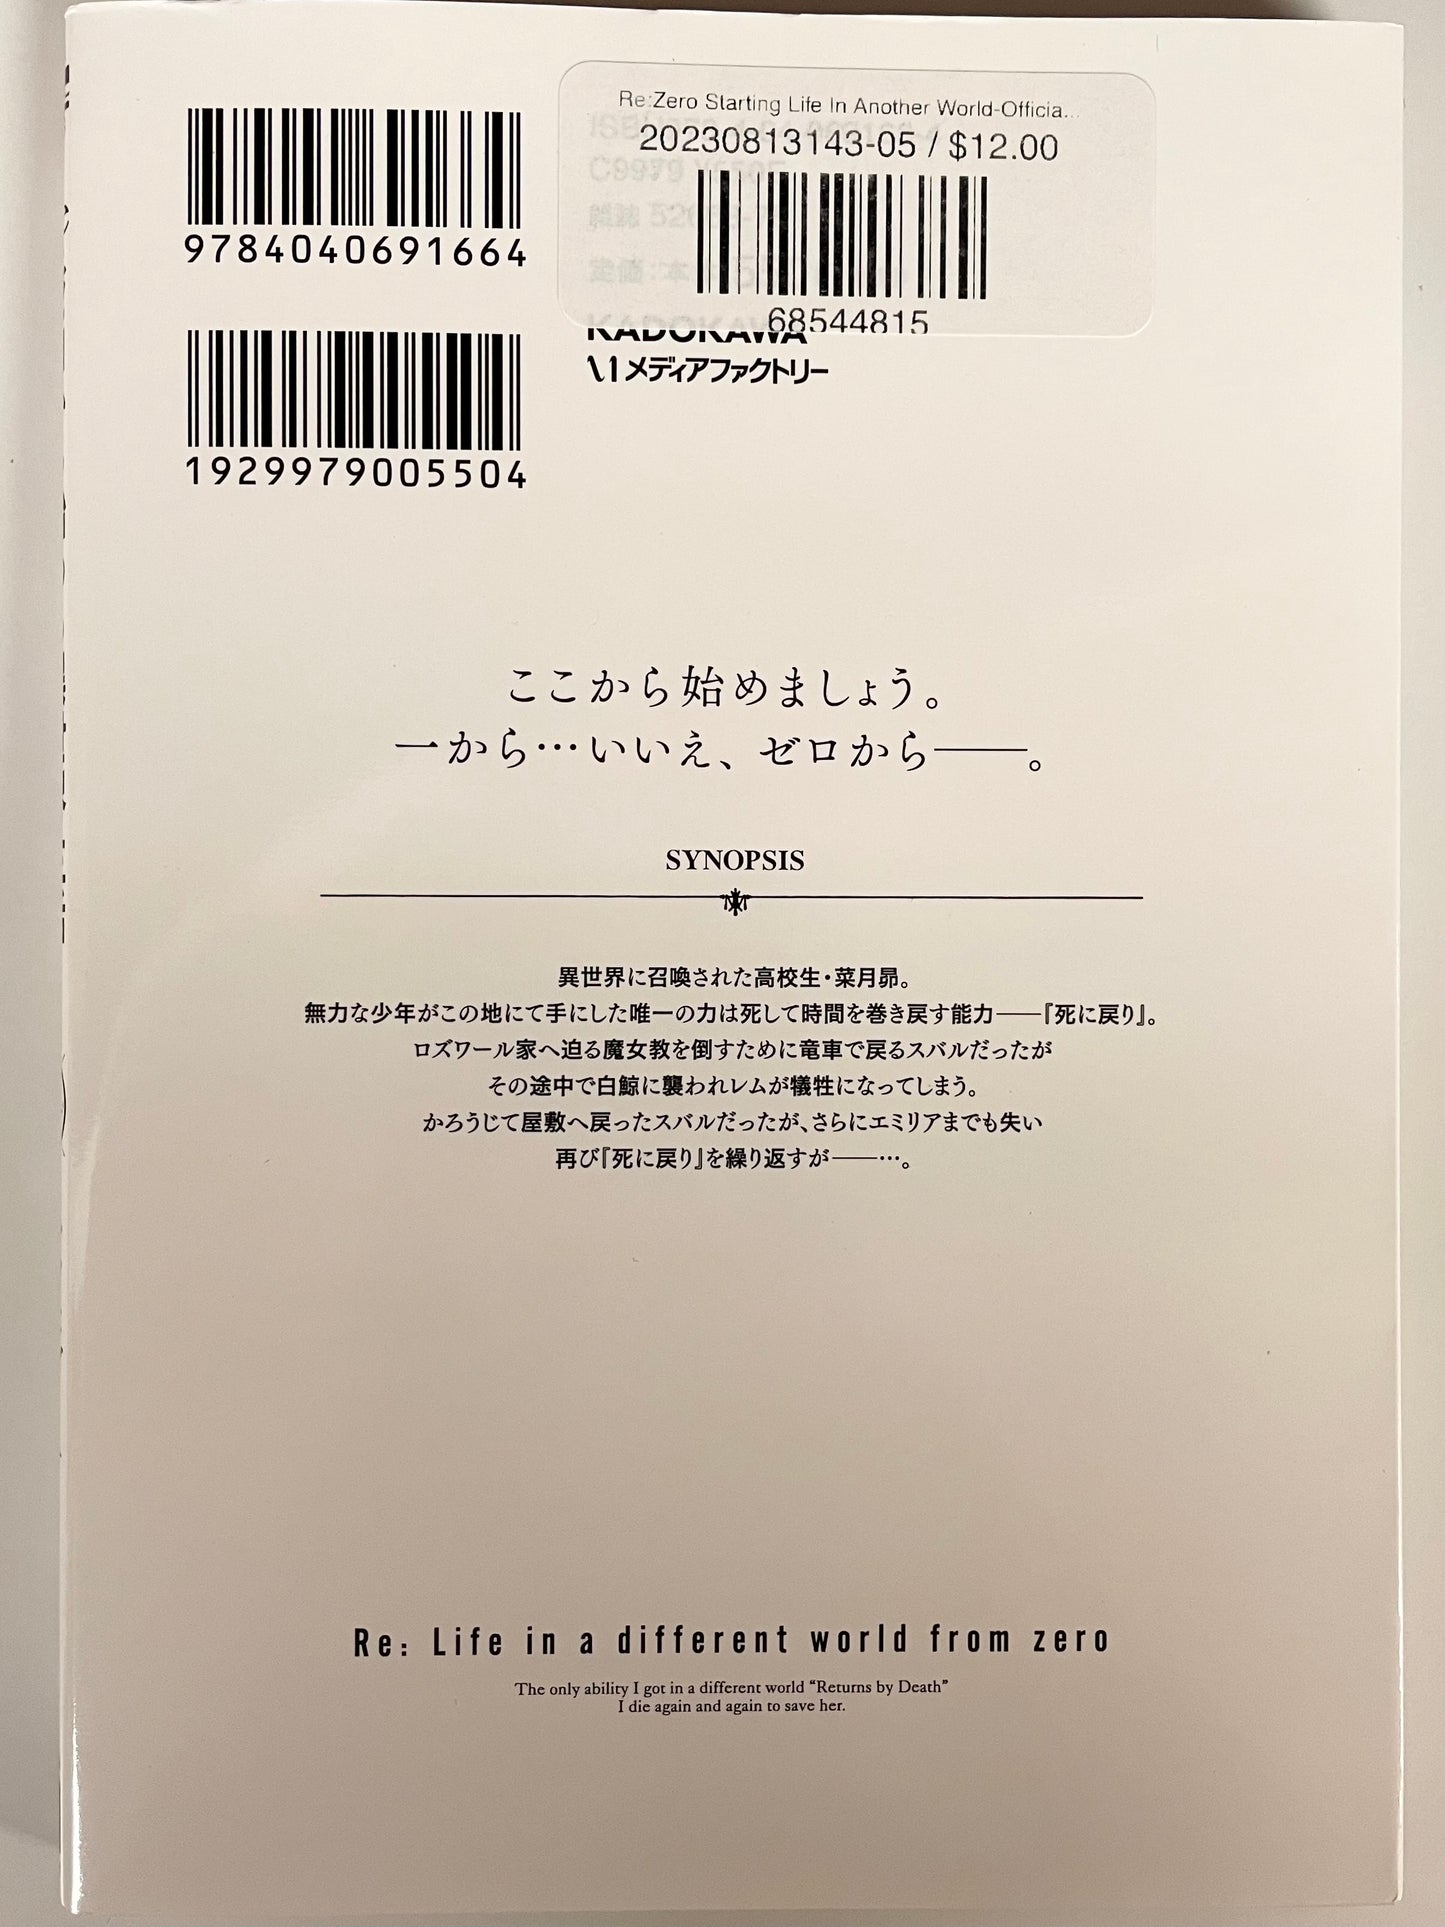 Re:Zero Ep-3 Vol.5-Starting Life In Another World-Official Japanese Edition